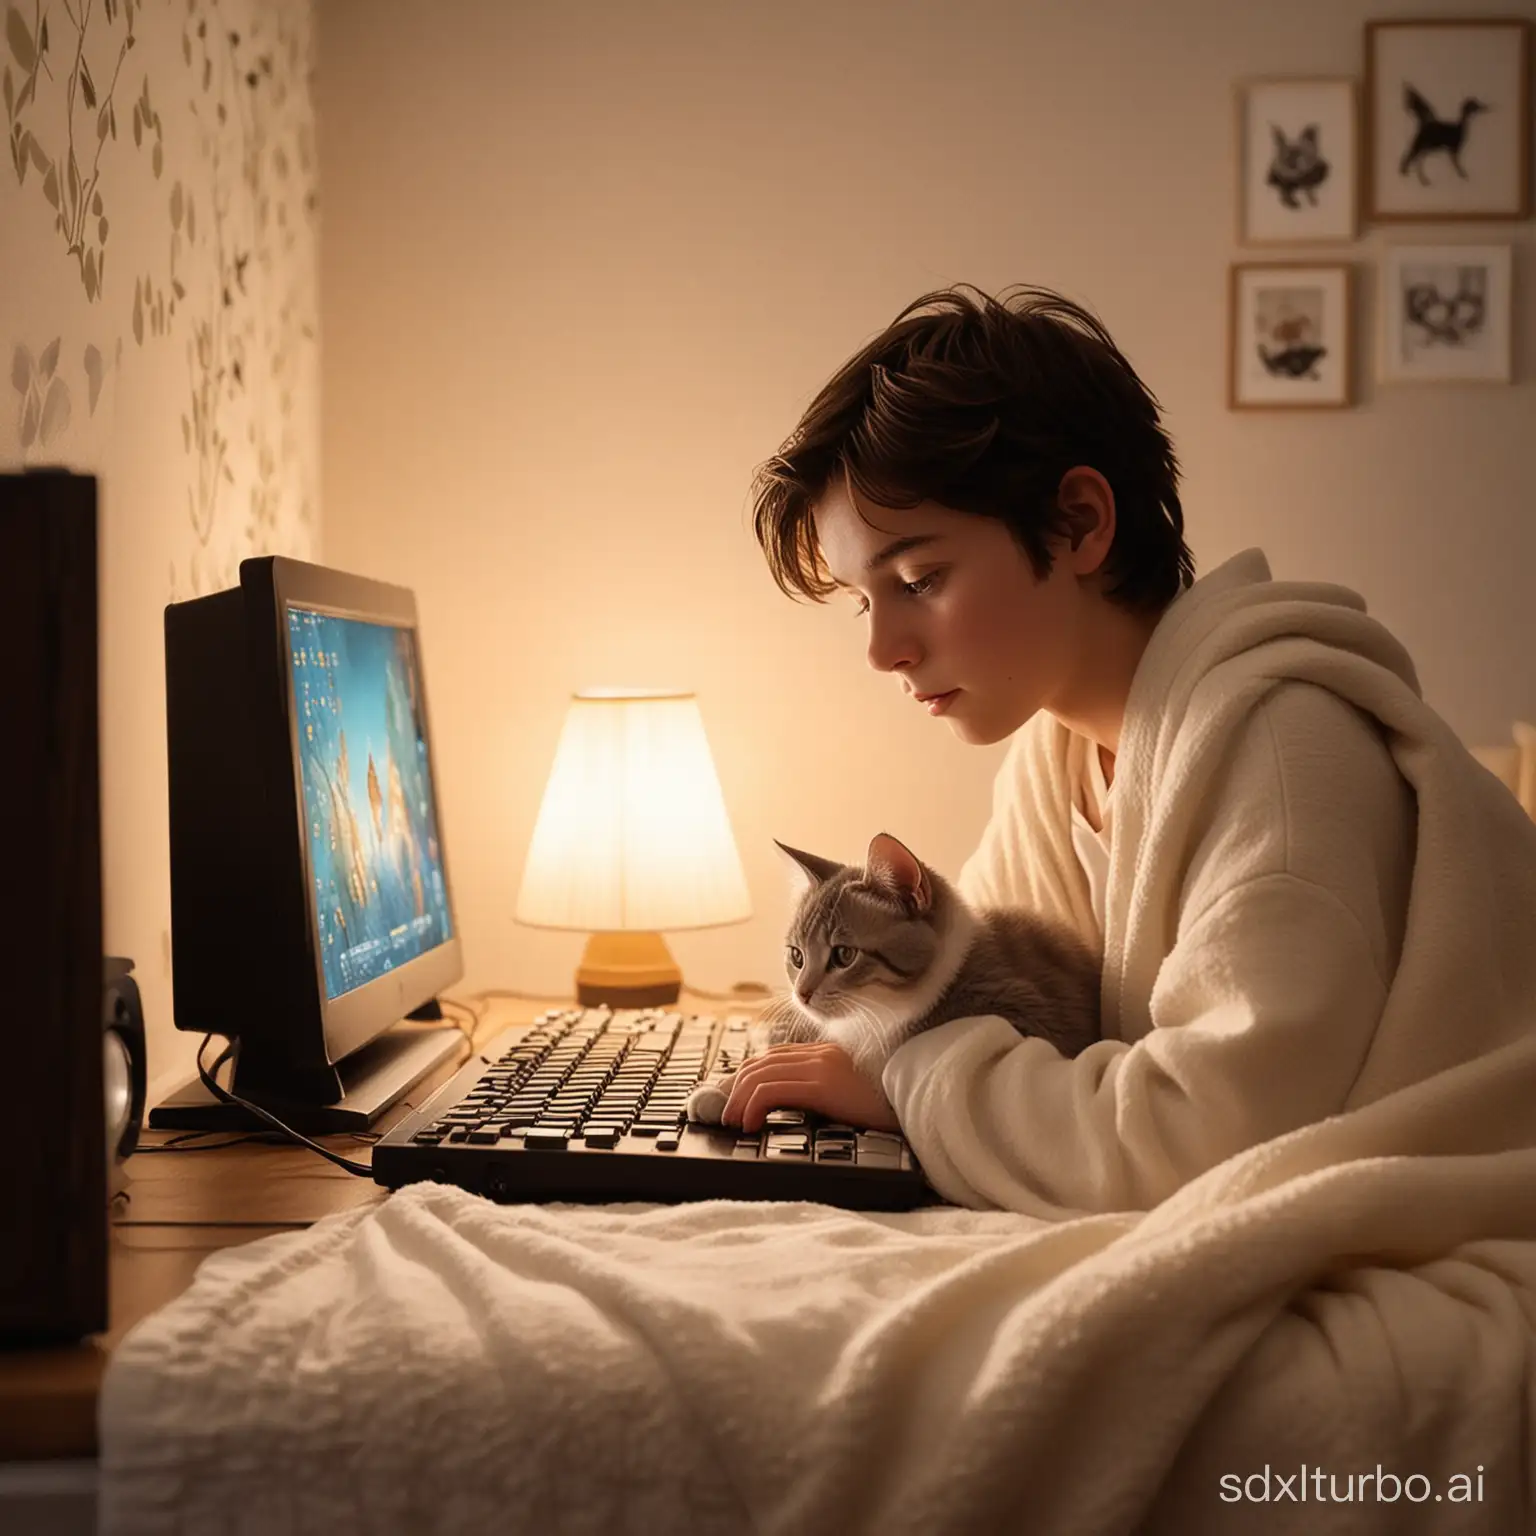 Young-Boy-Playing-Video-Game-Under-Lamp-Light-with-Cat-Sleeping-Beside-Him